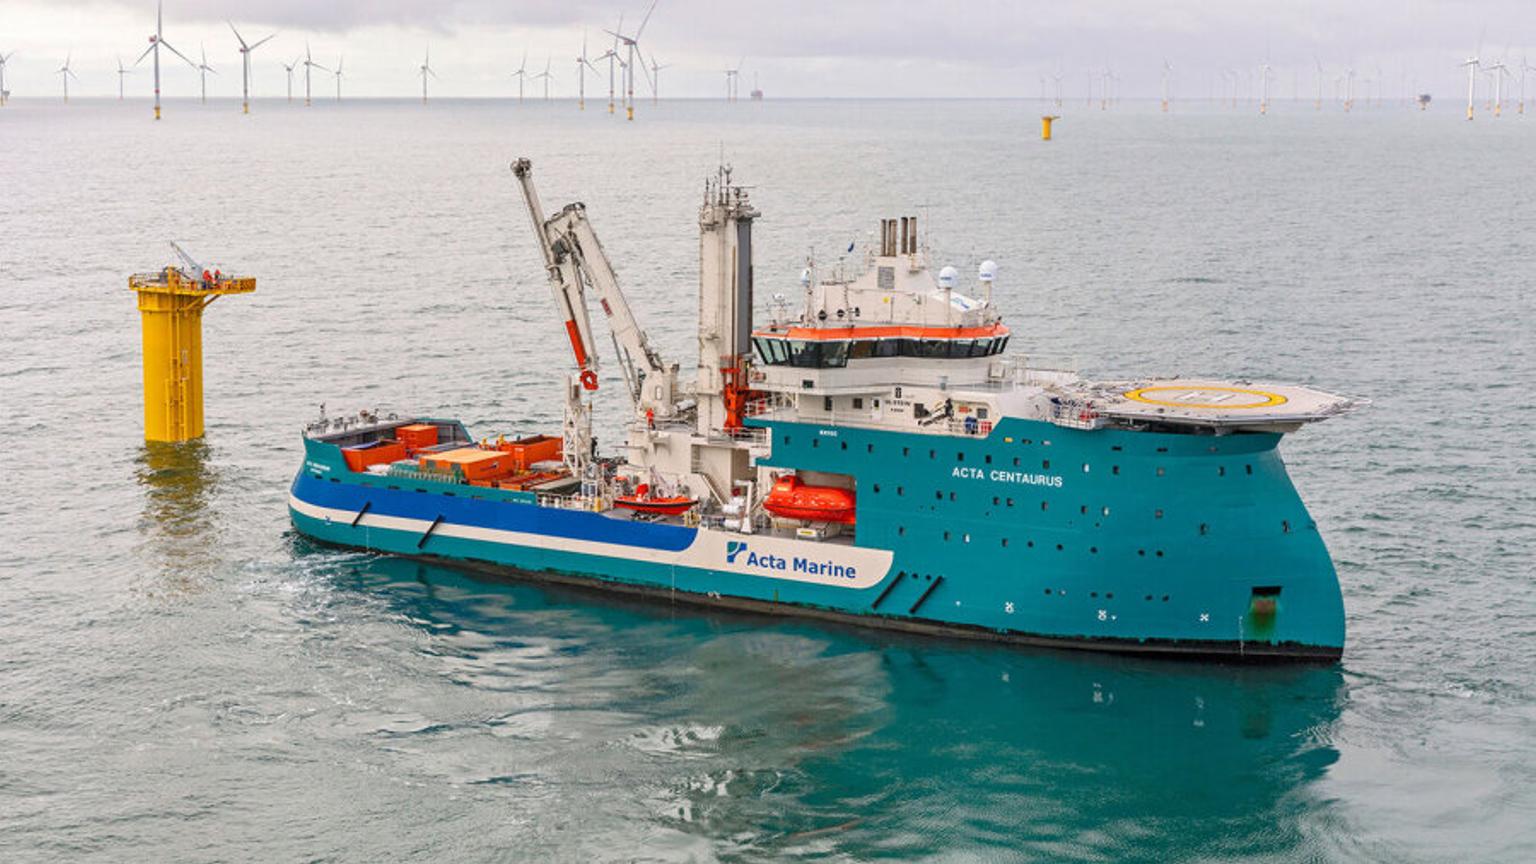 The X-BOW/X-STERN W2W SOV vessel Acta Centaurus performing services for offshore wind farms.